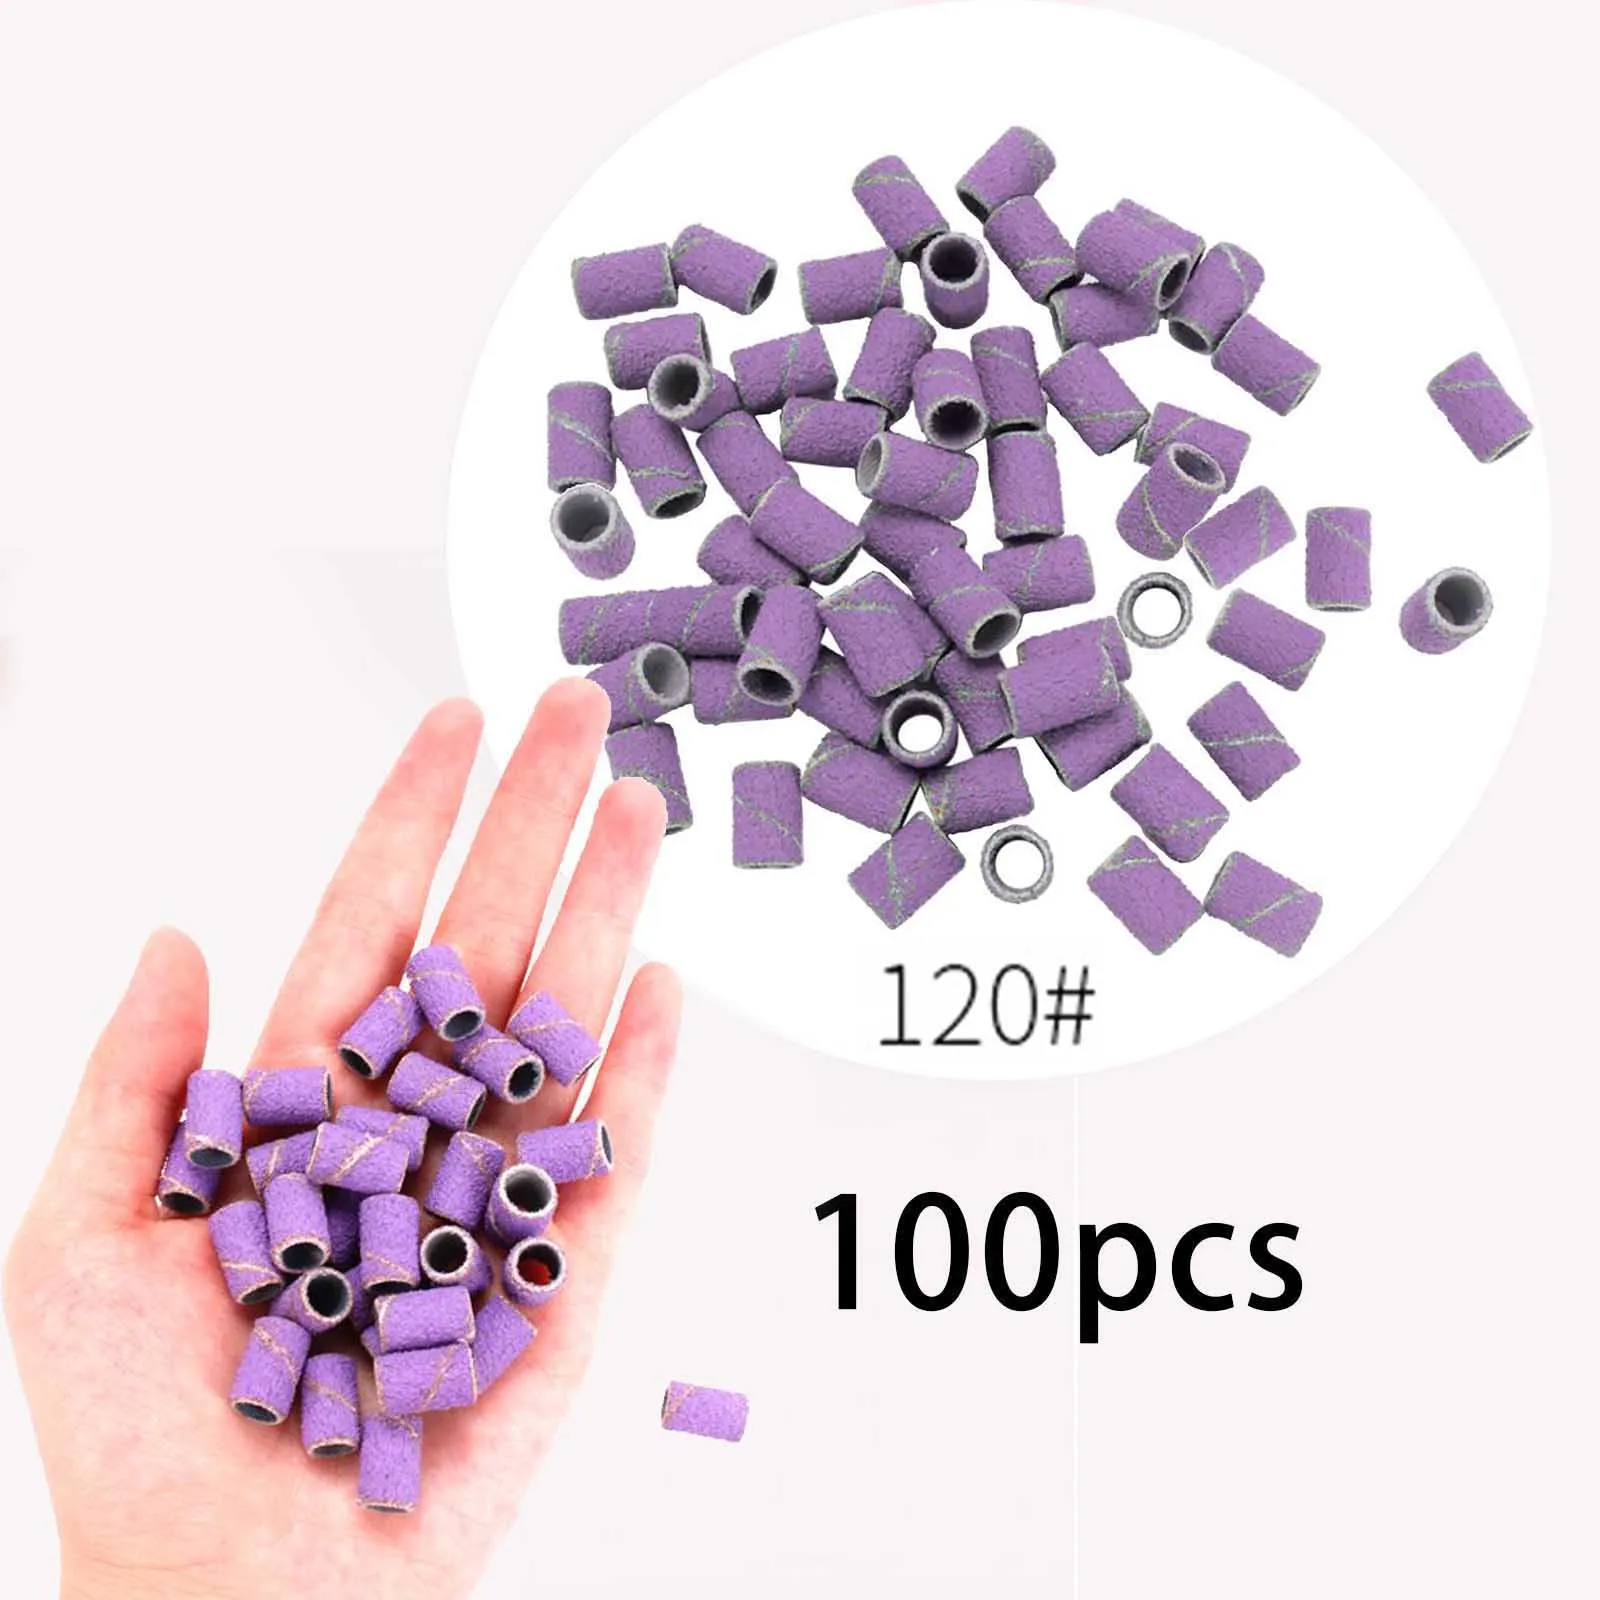 100Pcs/Pack Sanding Bands Nail UV Gel Polish Removal Electric Nail Drill Bit Accessories for Manicures Nail Art Tool